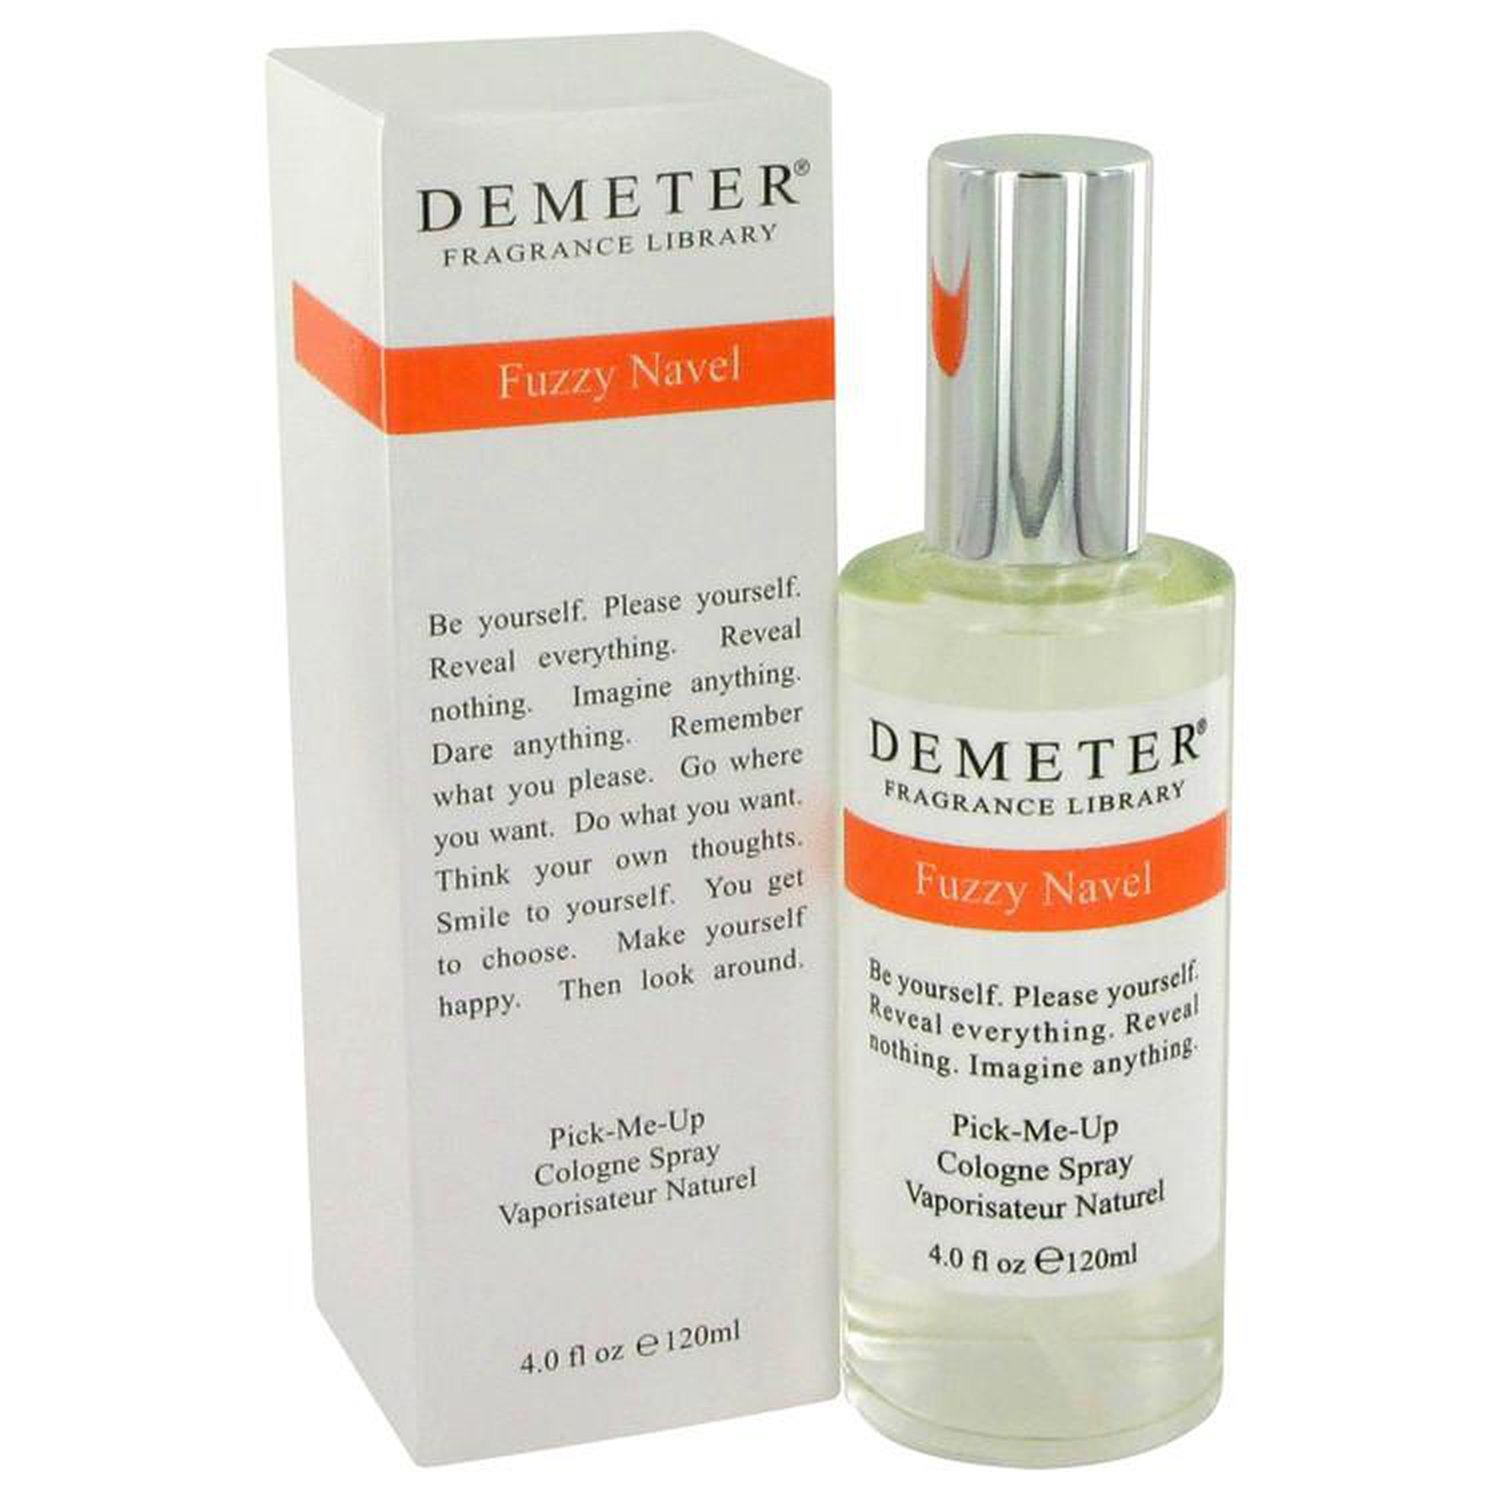 Fuzzy Naval Perfume by Demeter for Women. Pick-me Up Cologne Spray 4.0 Oz / 120 Ml.